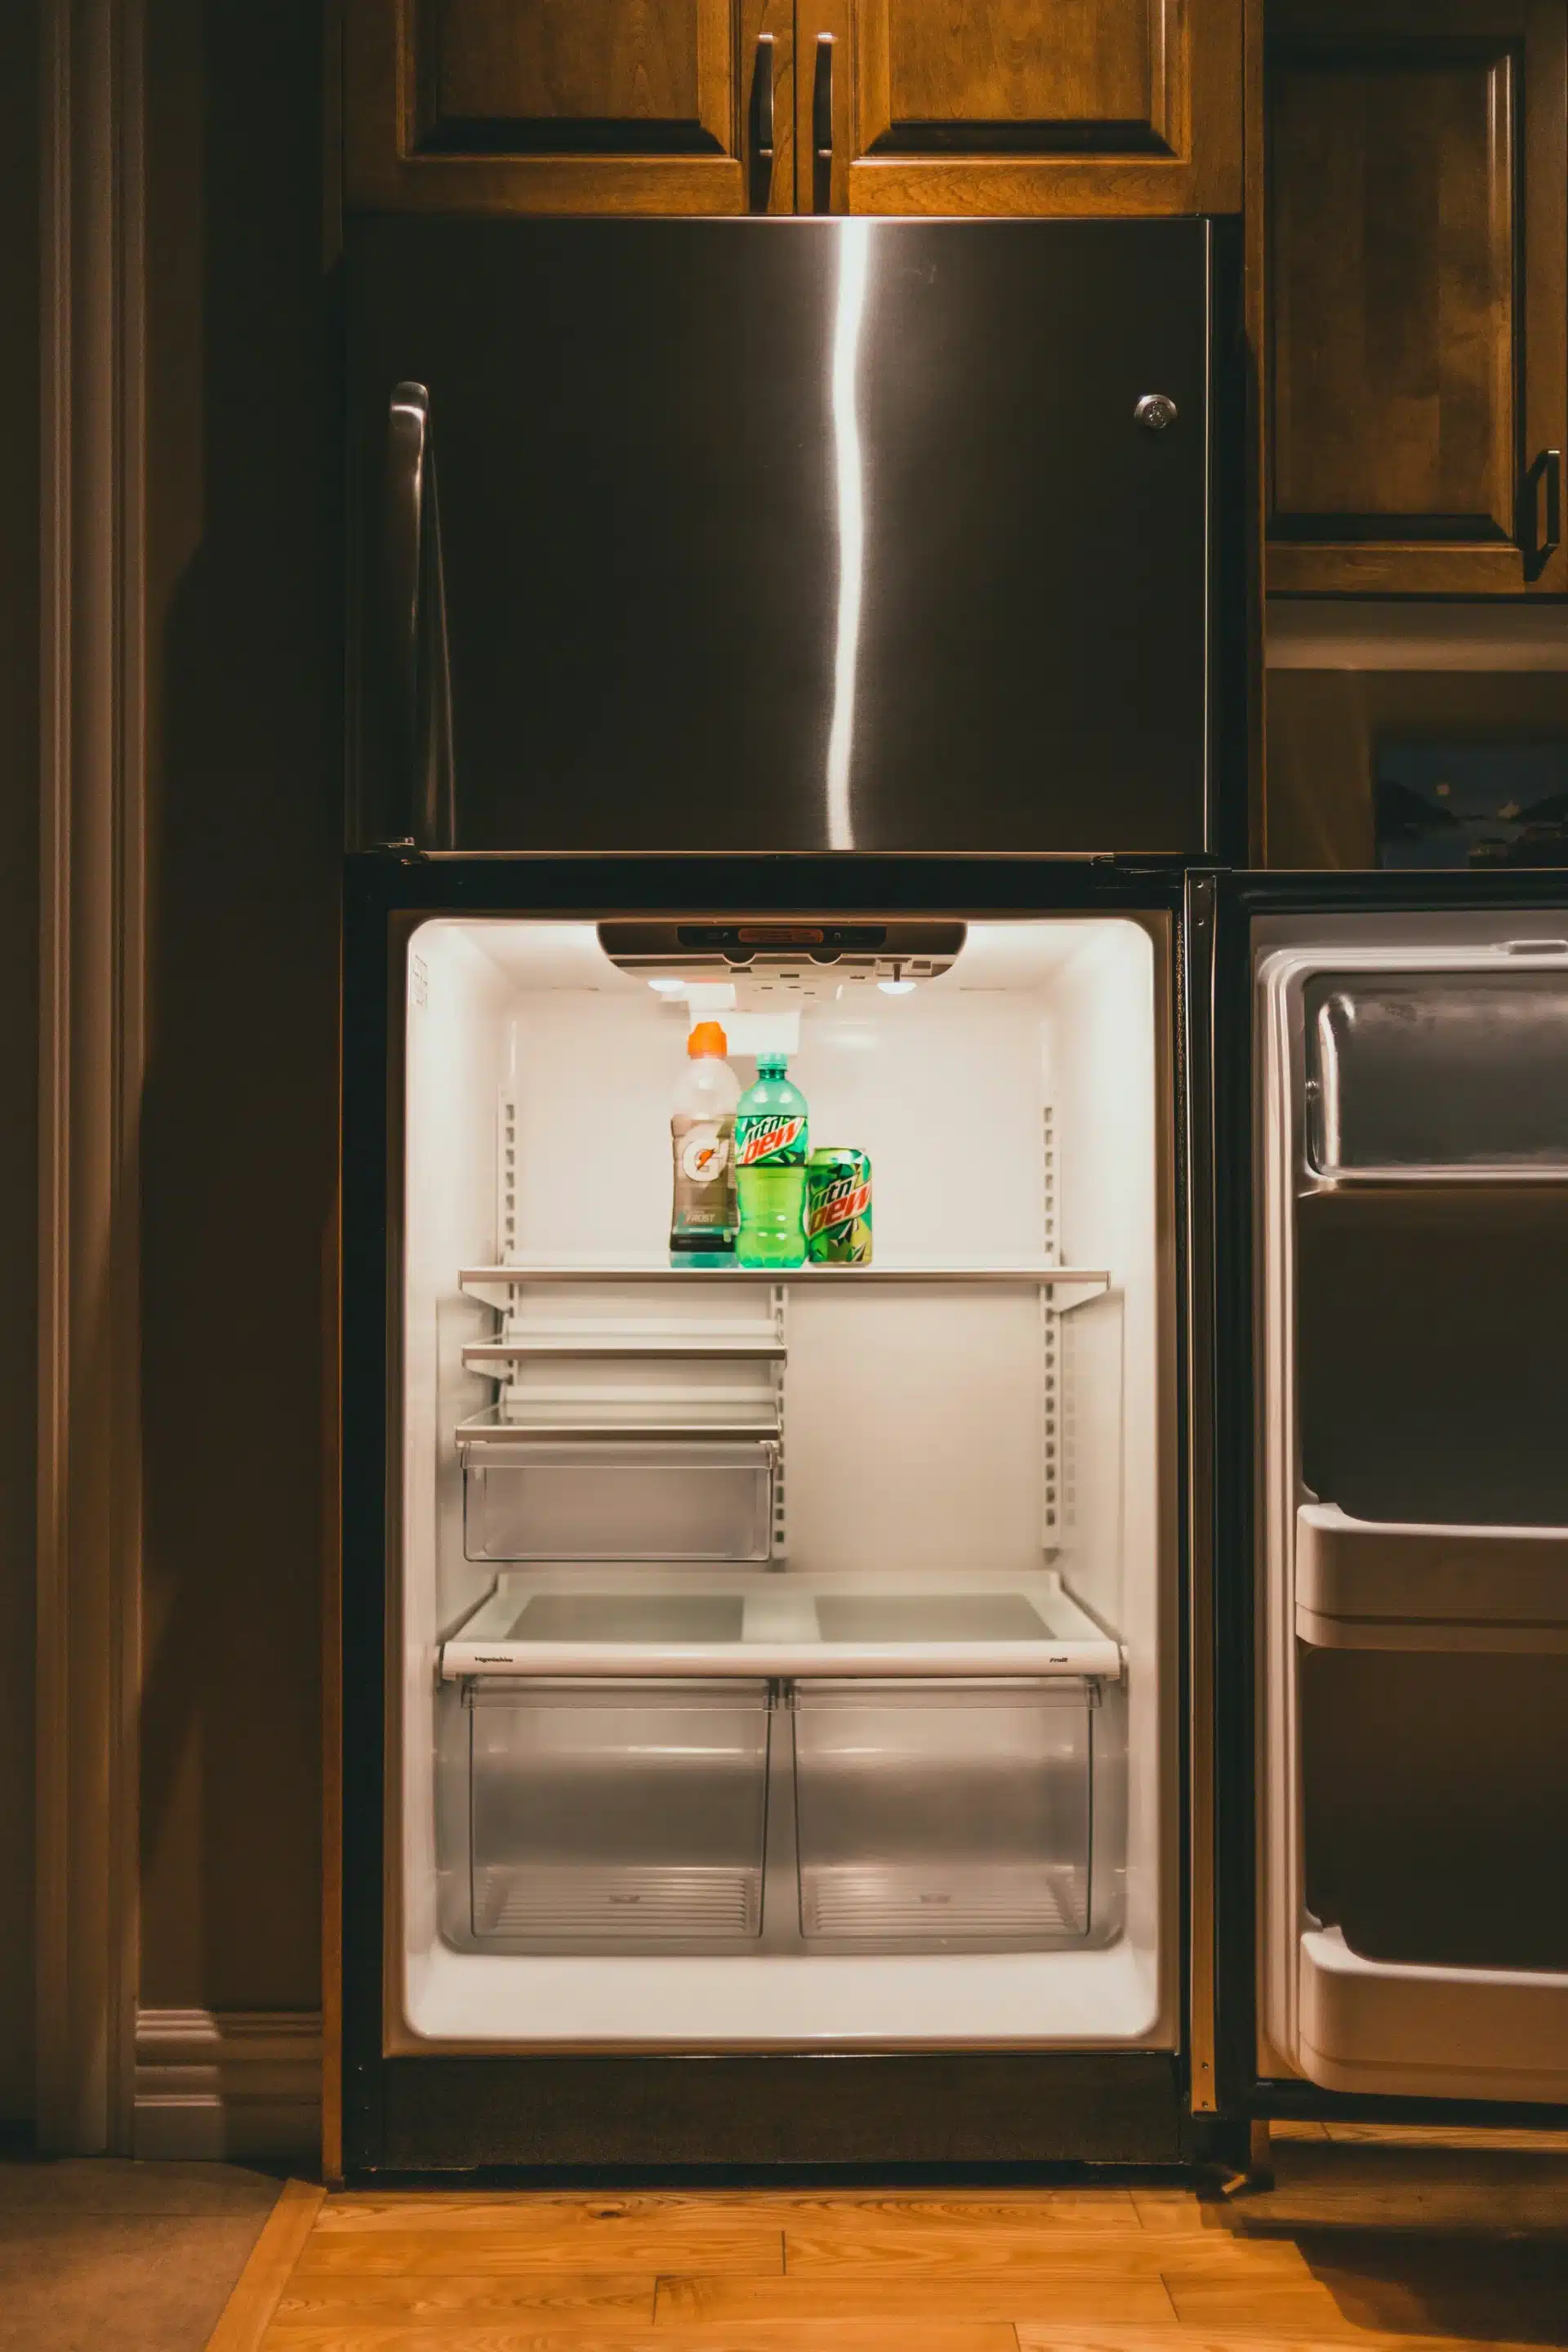 What do you need to know about refrigerators?